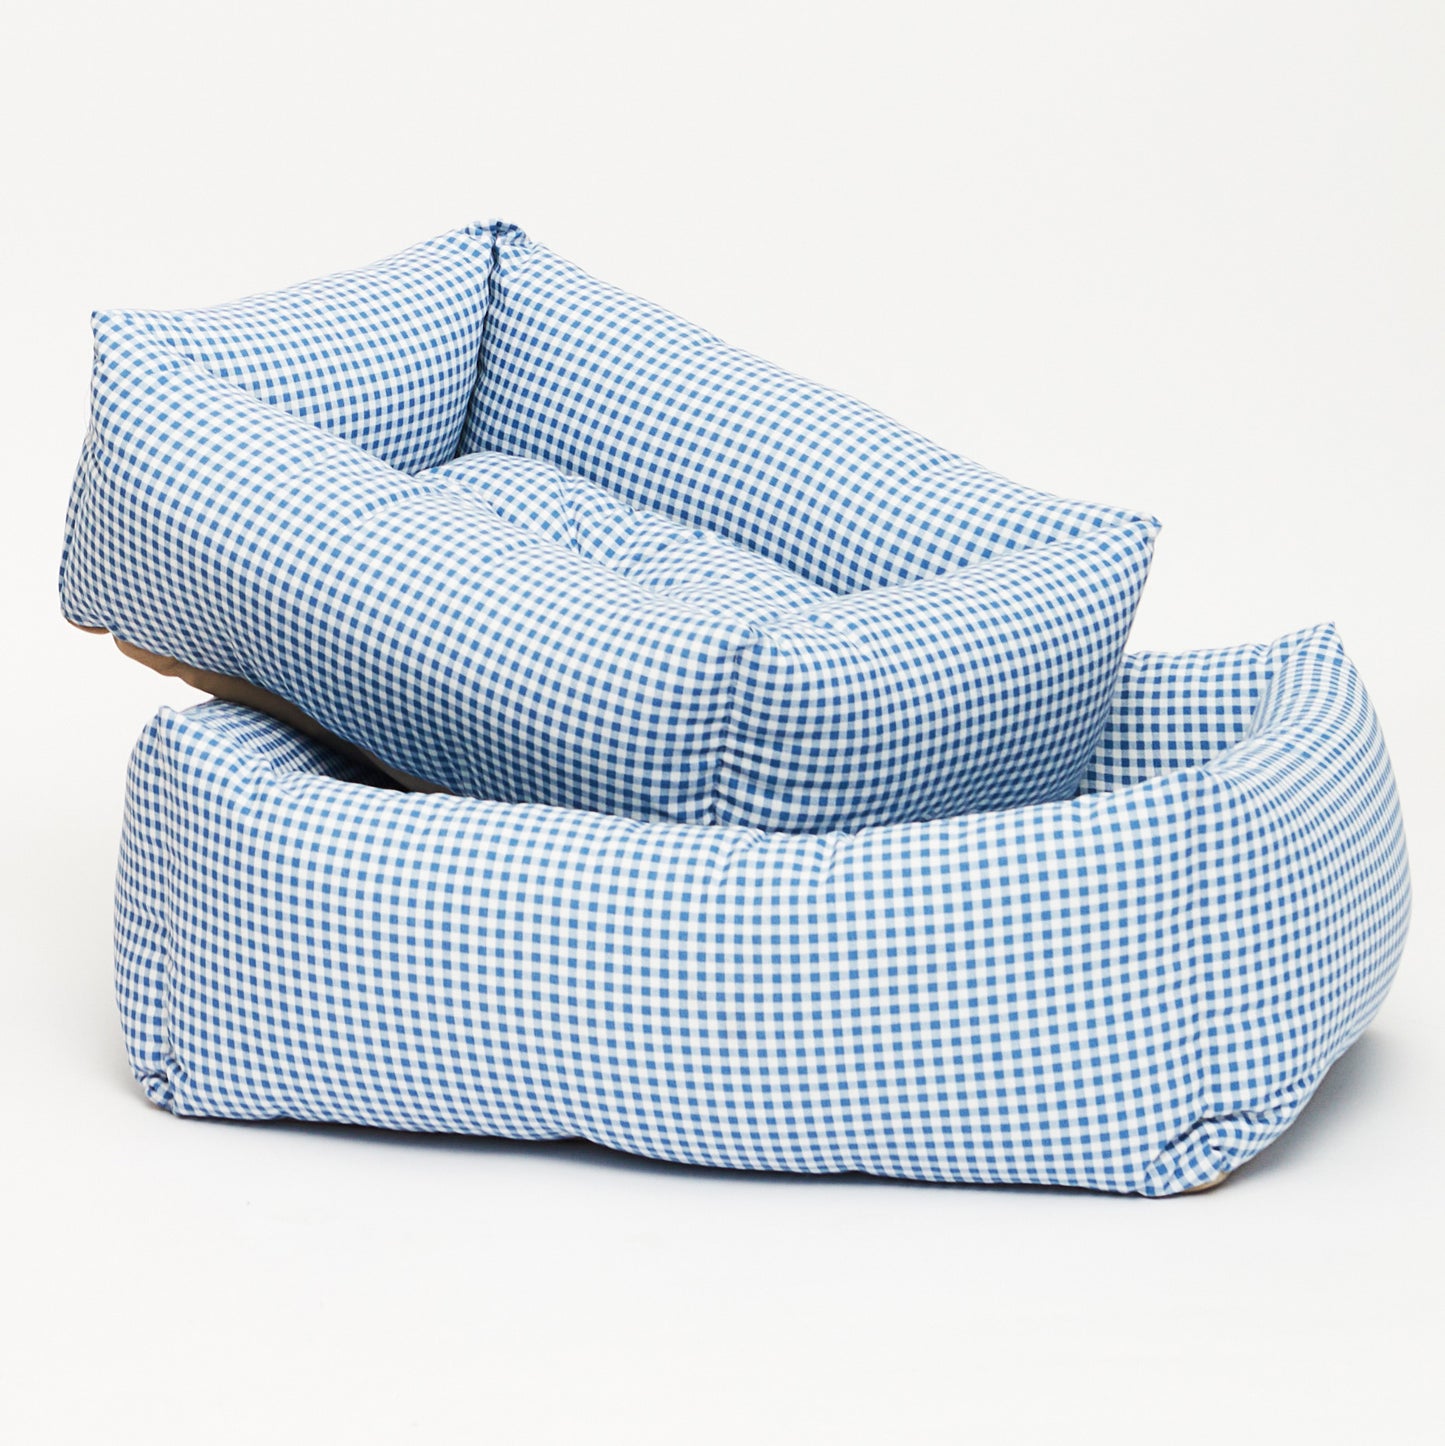 Beige Checked Cotton Bed - Waterproof Base